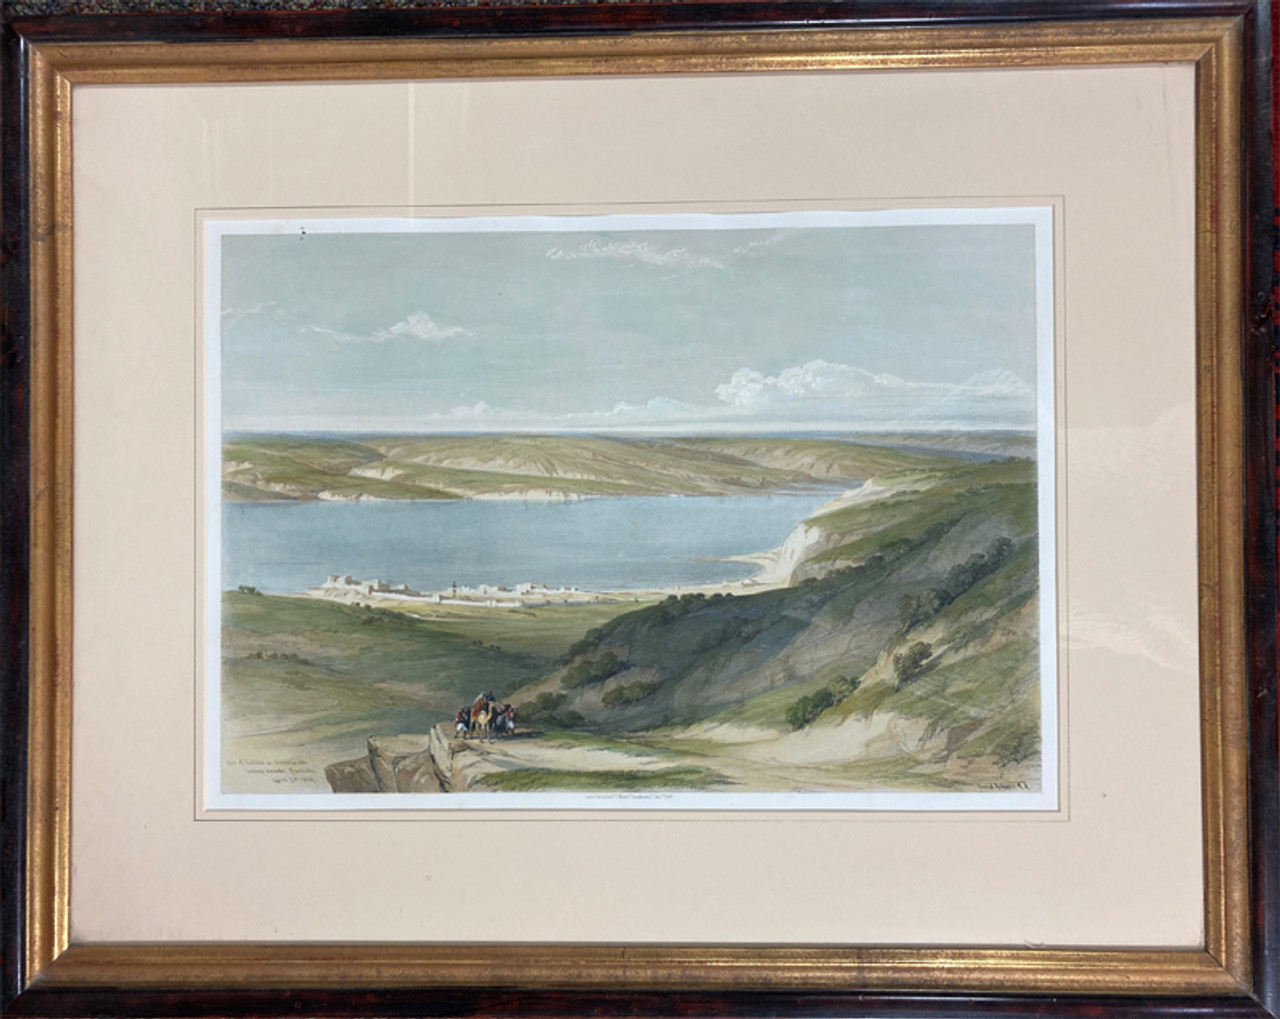 Tiberias Sea of Galilee by David Roberts 1842-46 original hand colored lithograph